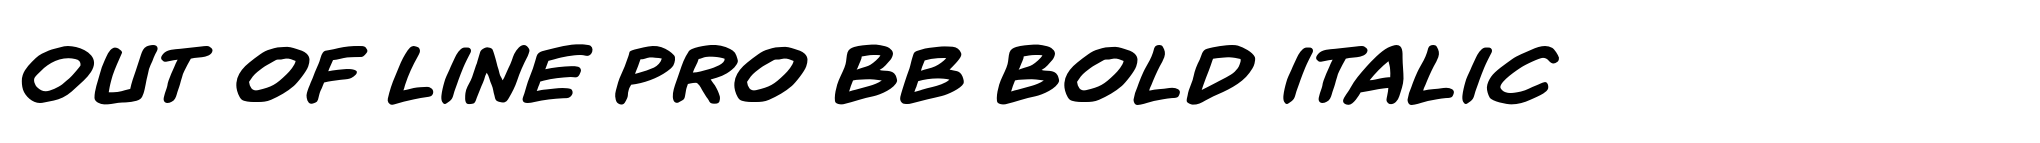 Out of Line Pro BB Bold Italic image